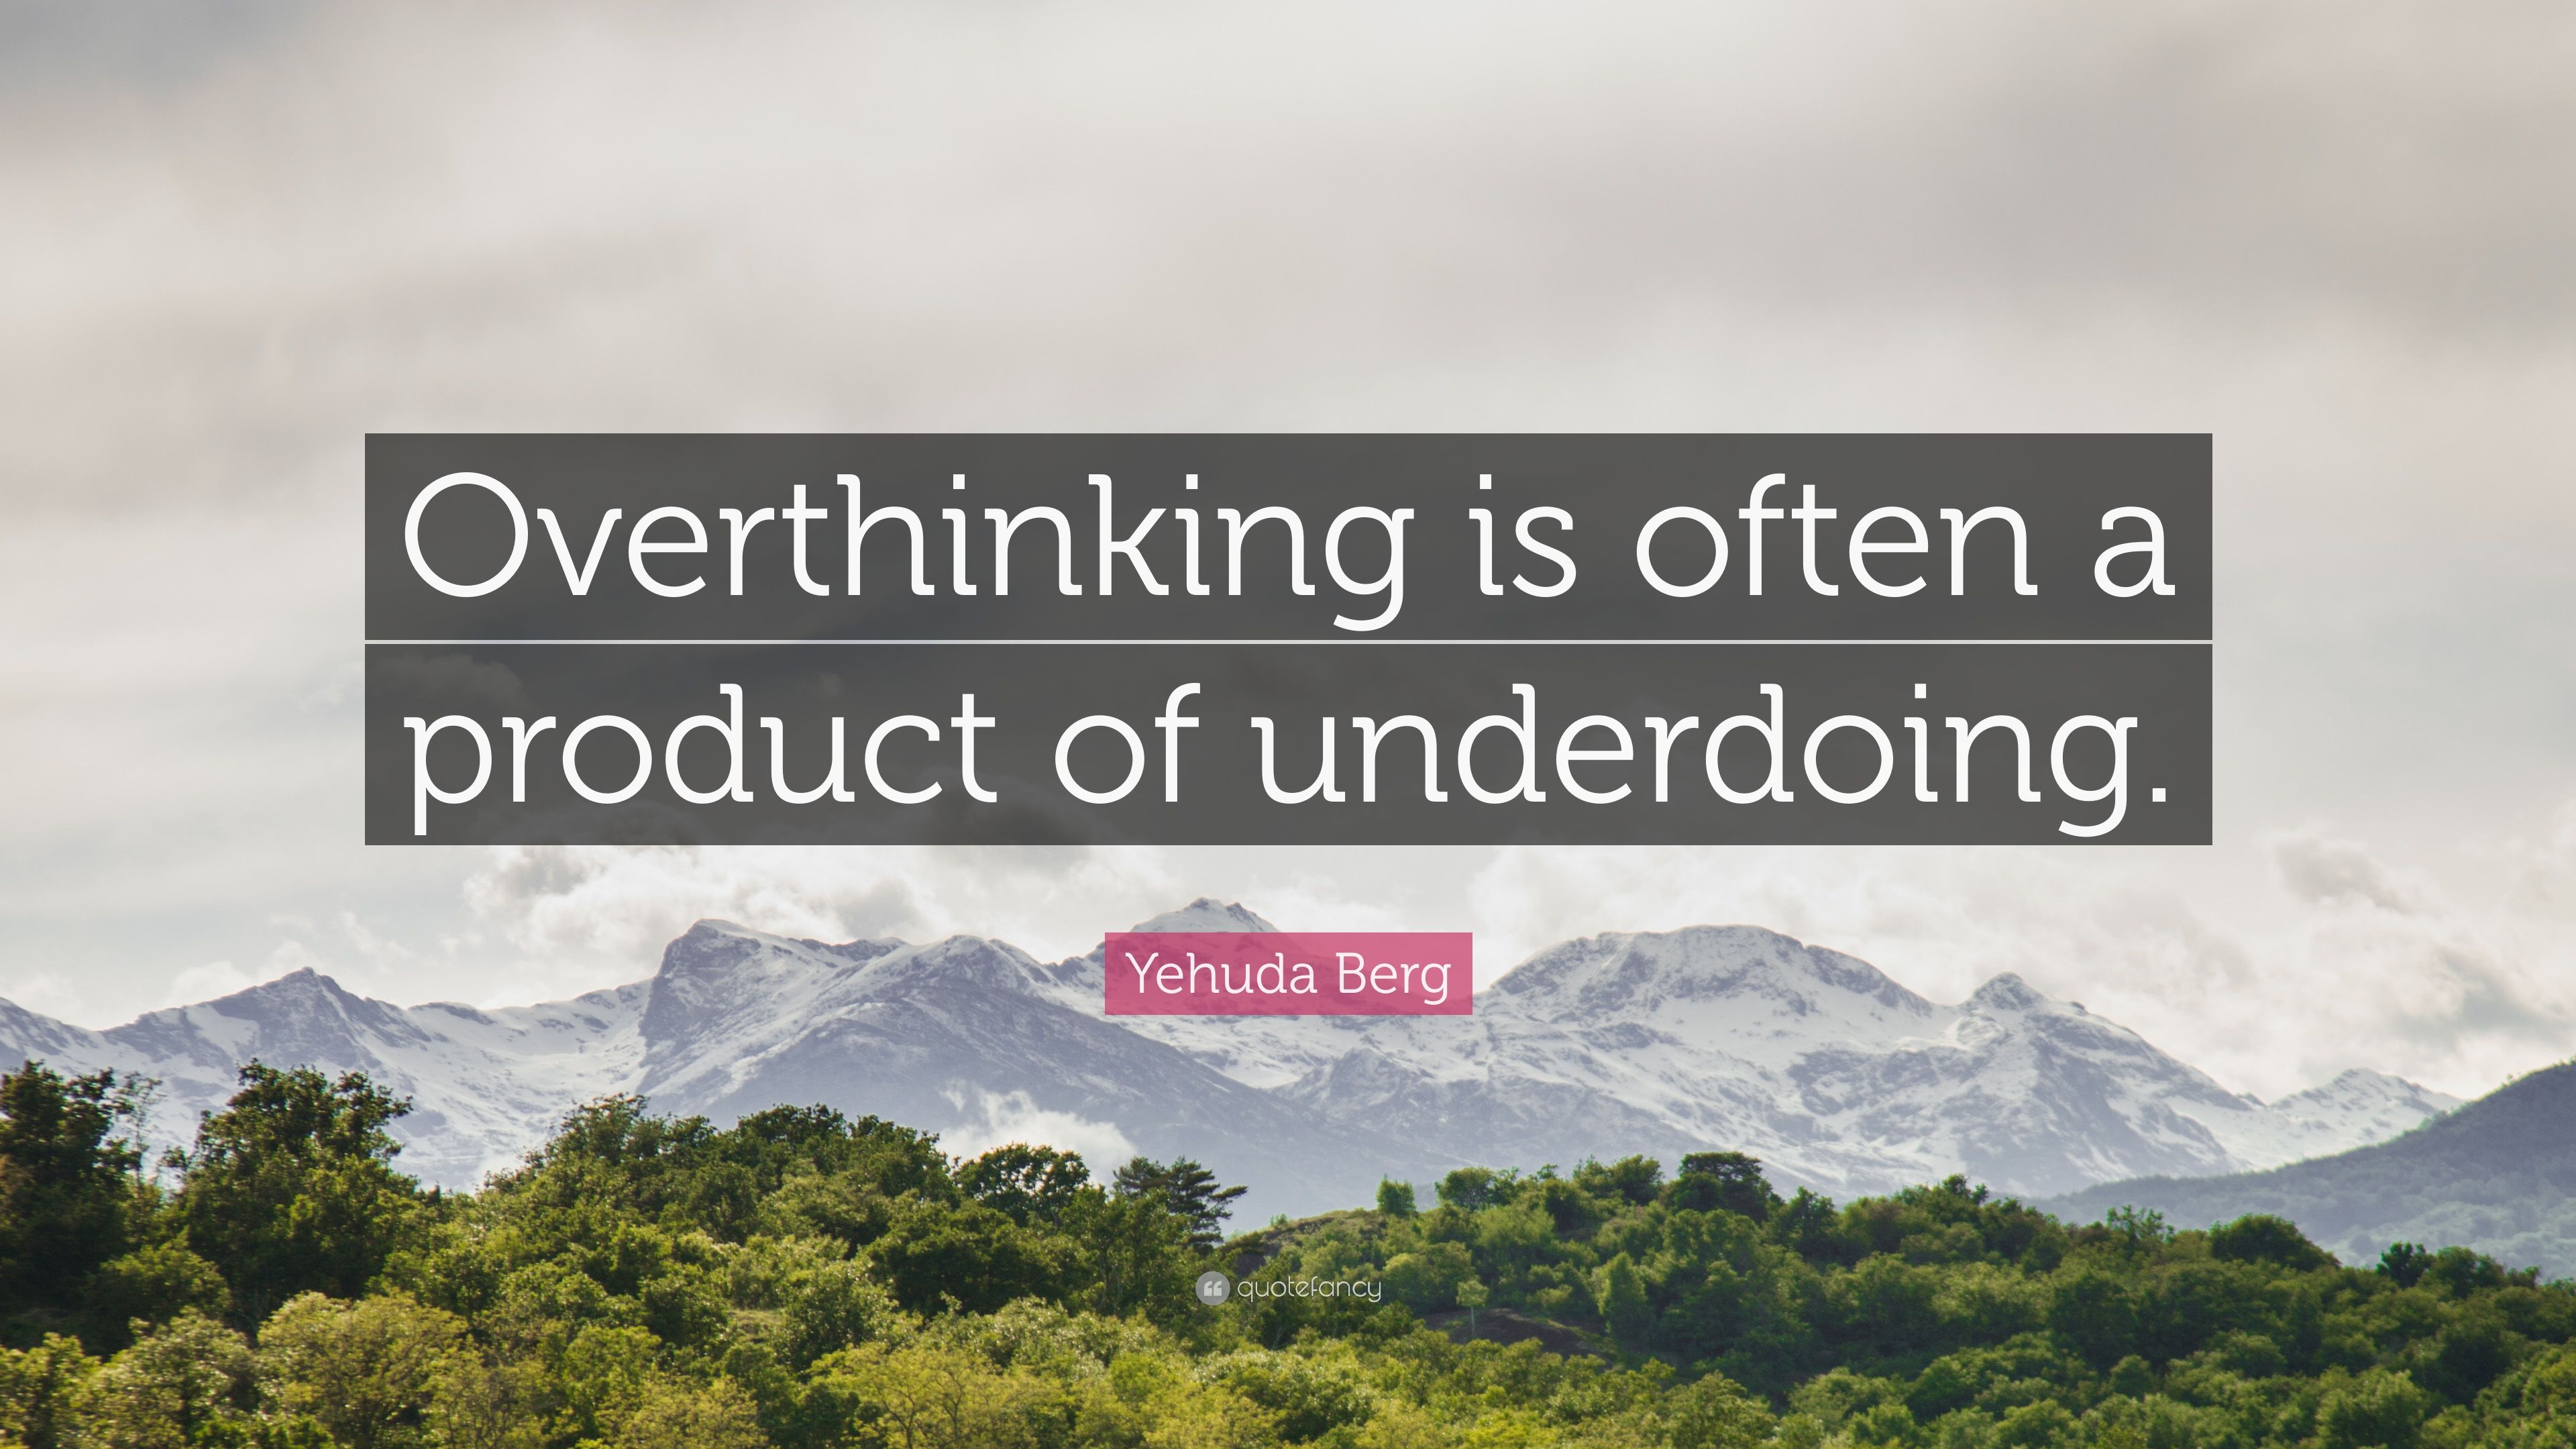 Yehuda Berg Quote: “Overthinking is often a product of underdoing.” (10 wallpaper)